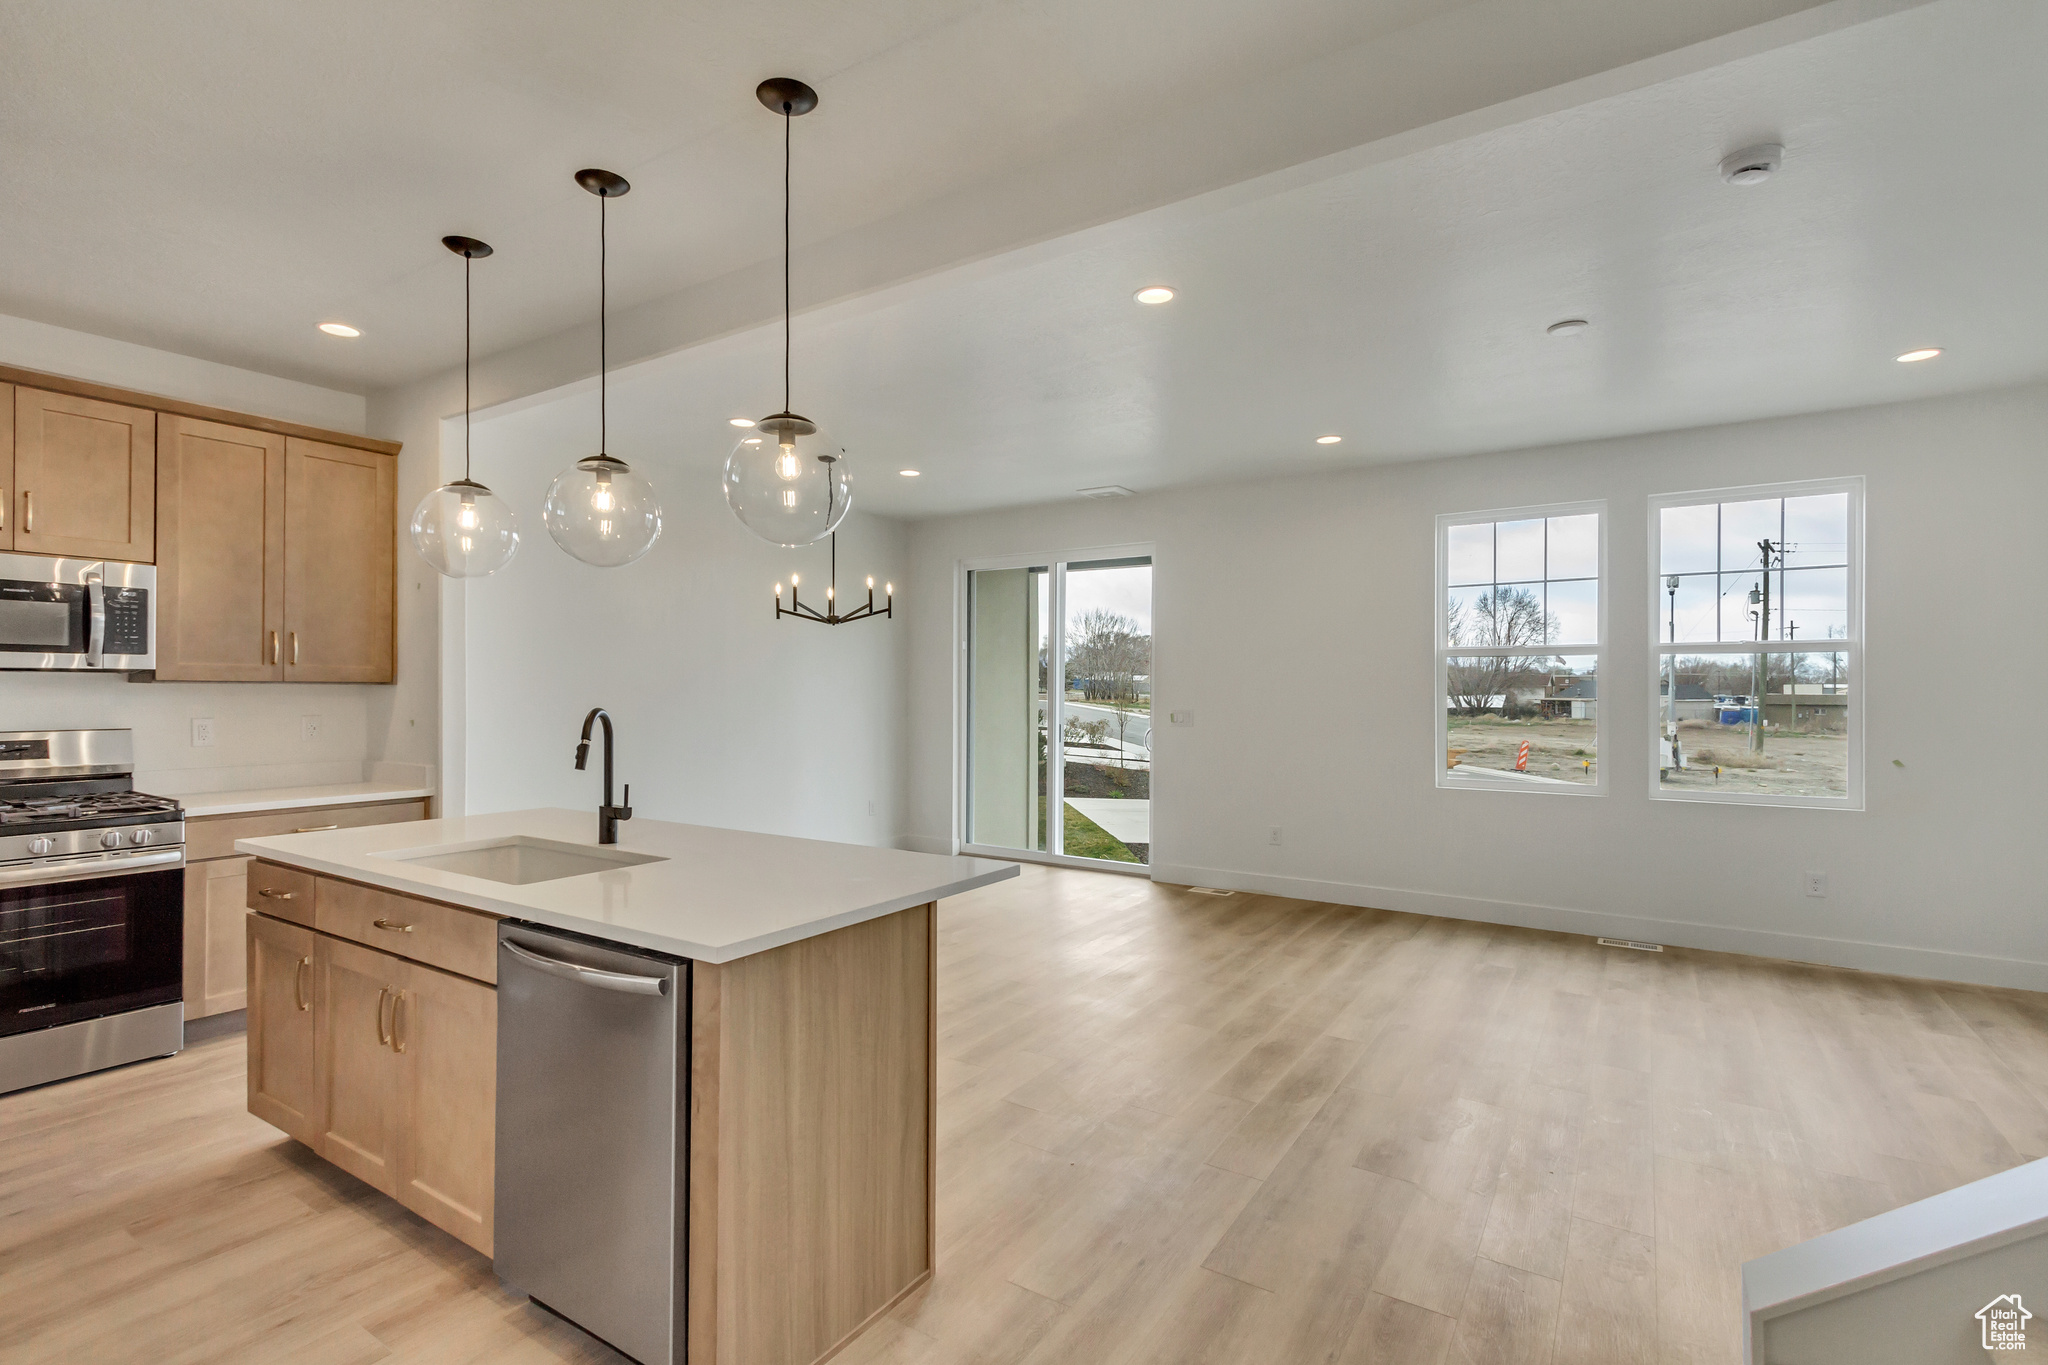 Kitchen featuring decorative light fixtures, stainless steel appliances, sink, light hardwood / wood-style floors, and an island with sink